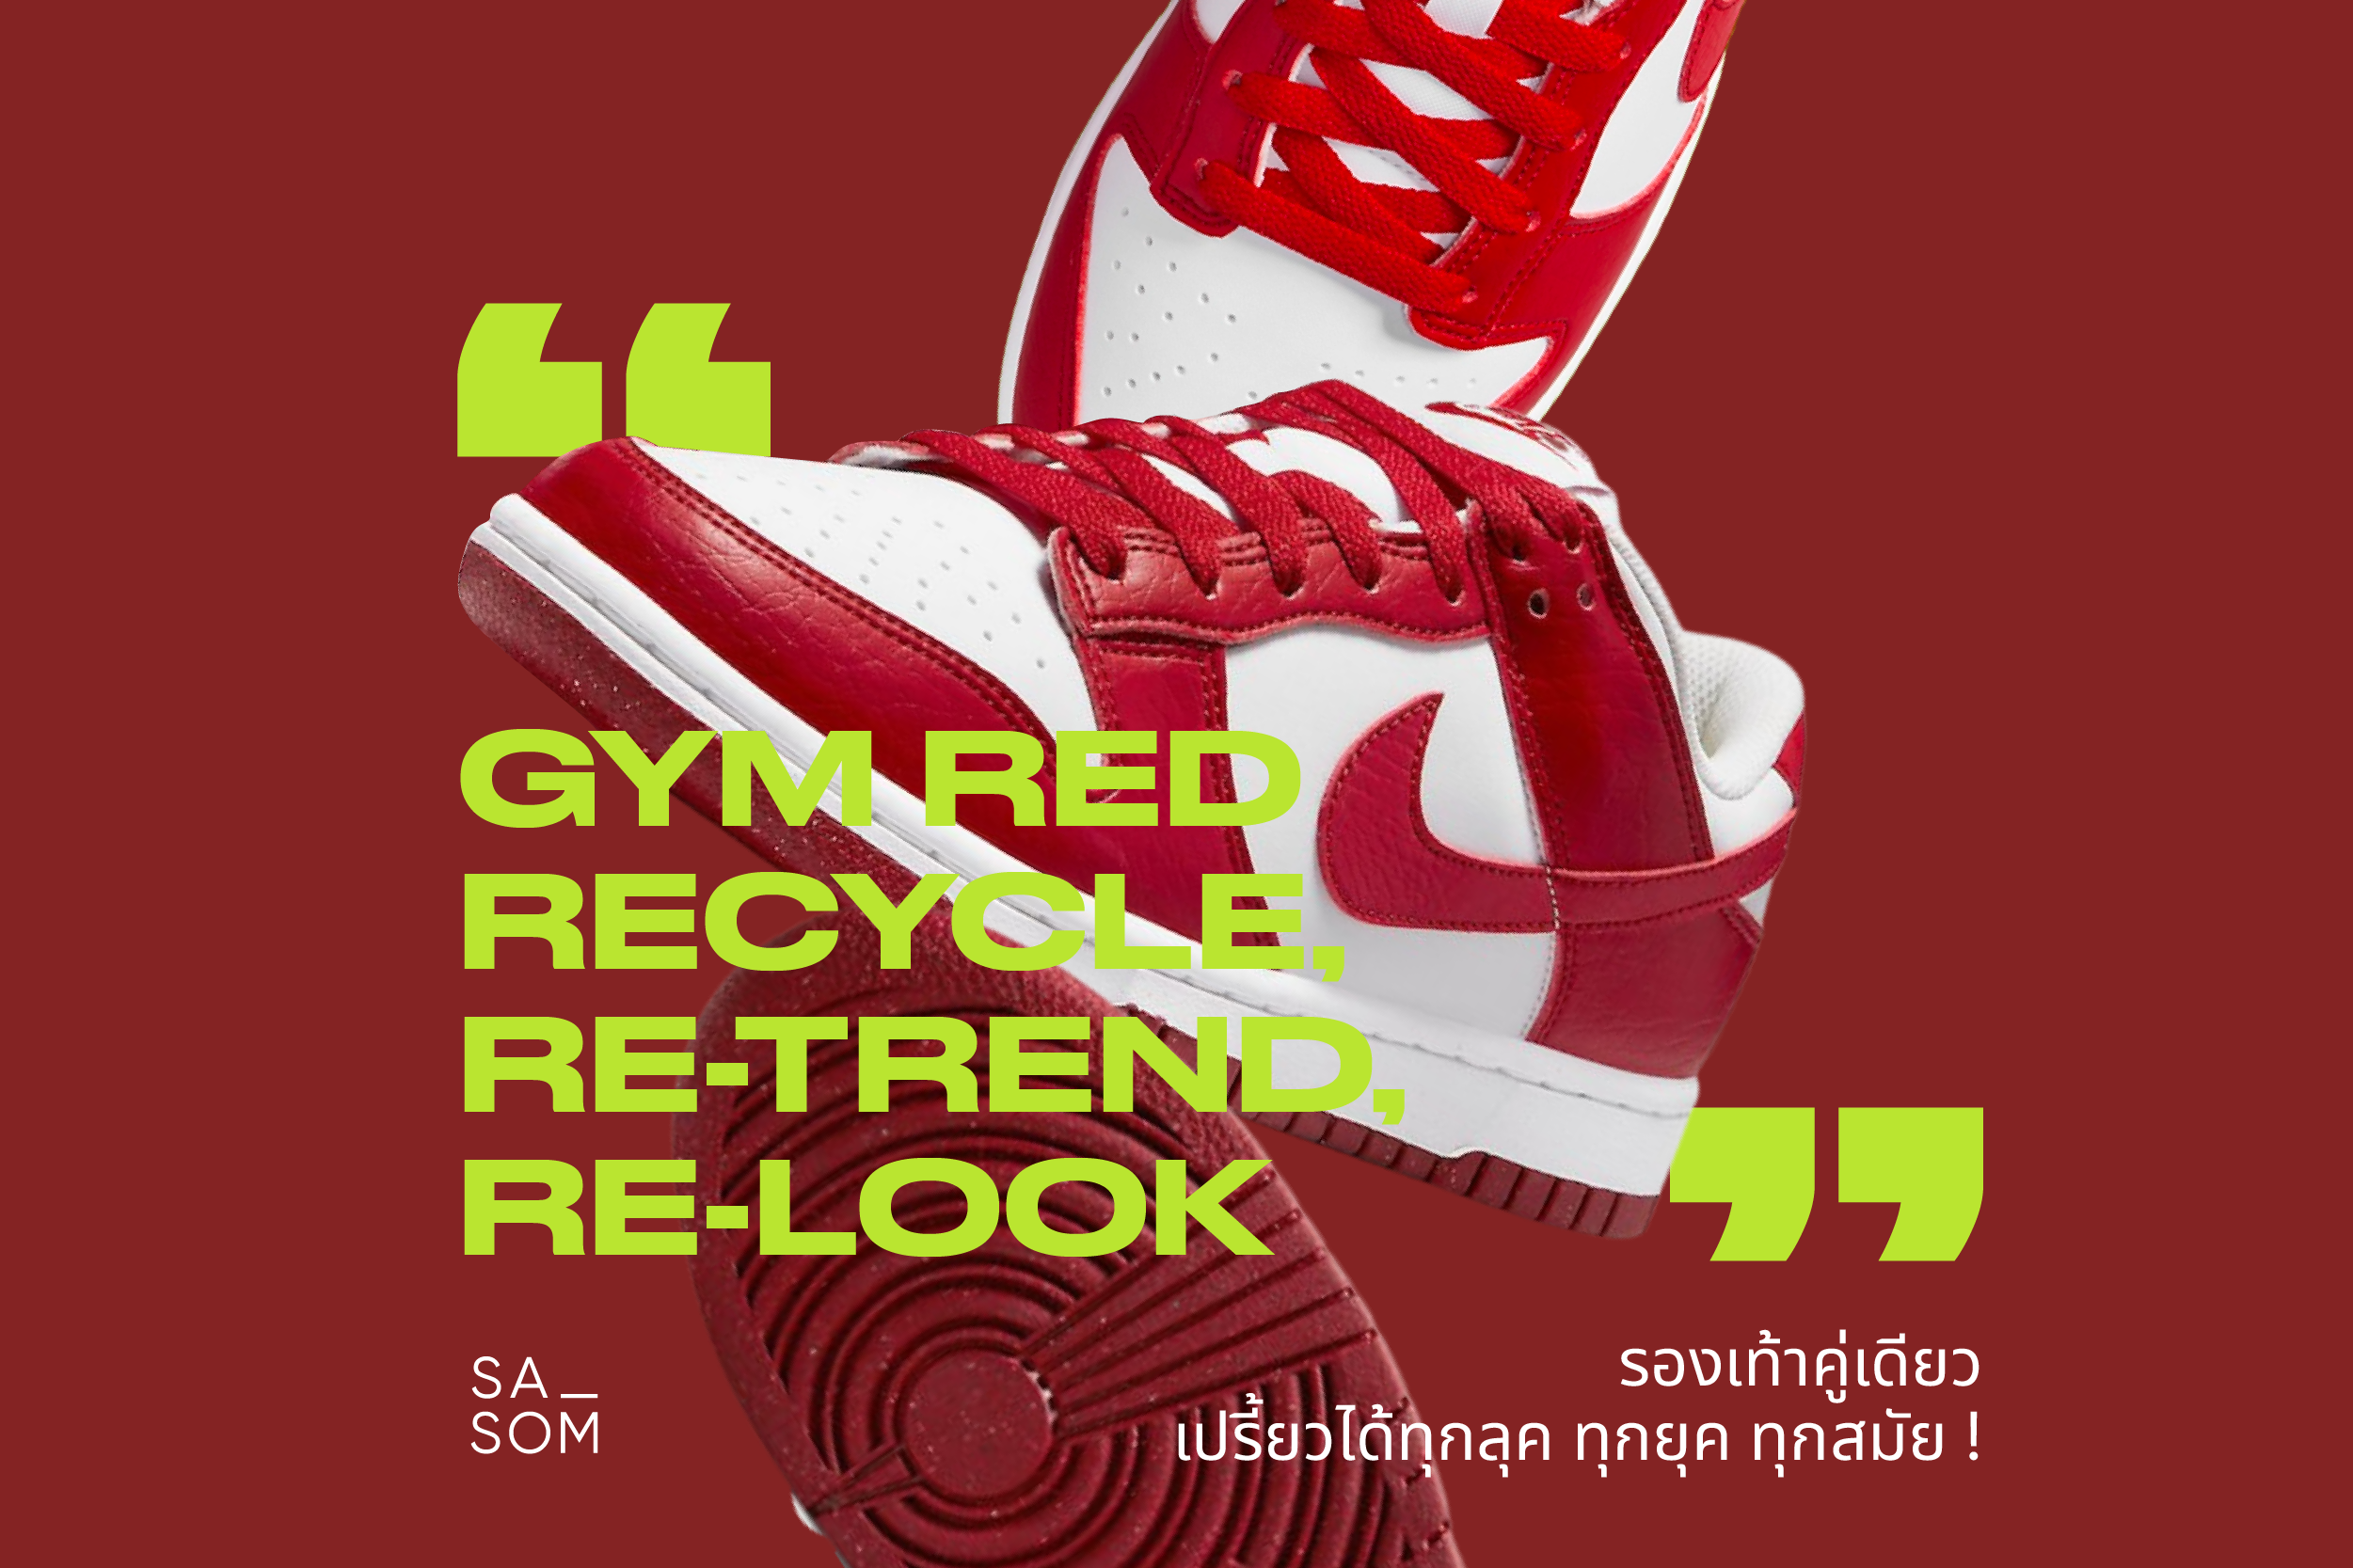 “Gym Red, Recycle, Re-trend, Re-look” Style for our next future !